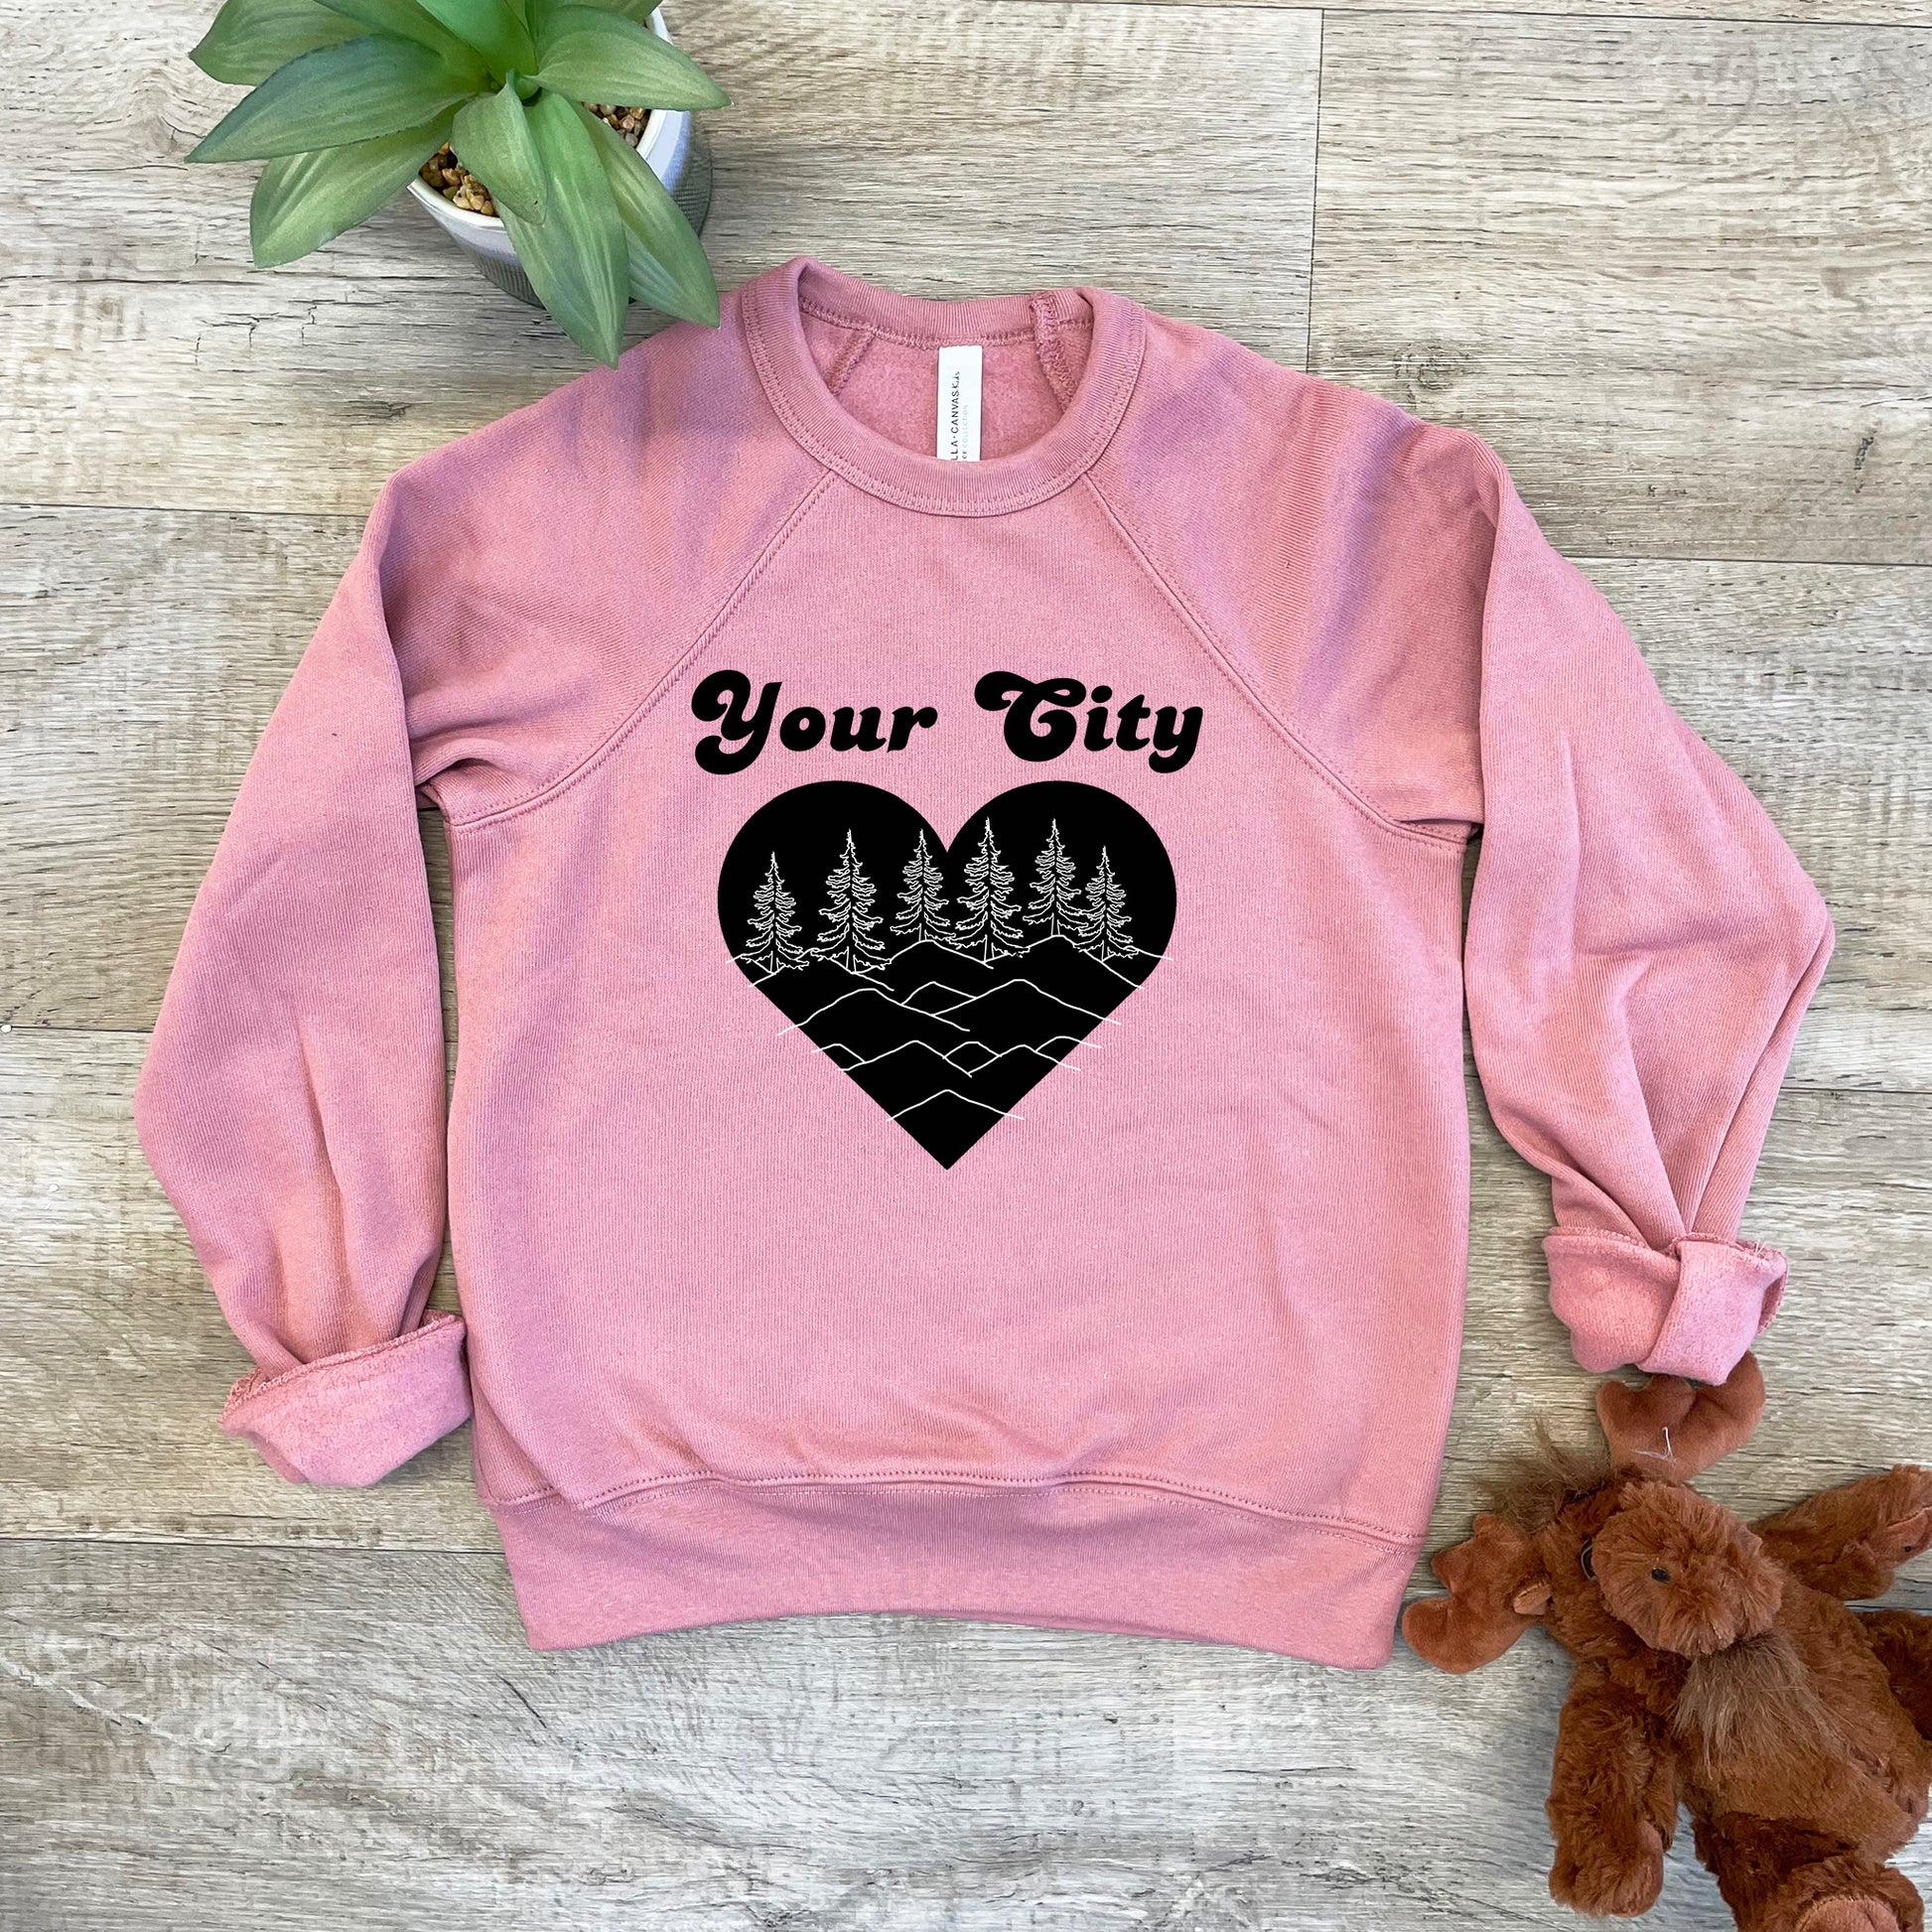 a pink sweatshirt with a heart and trees on it